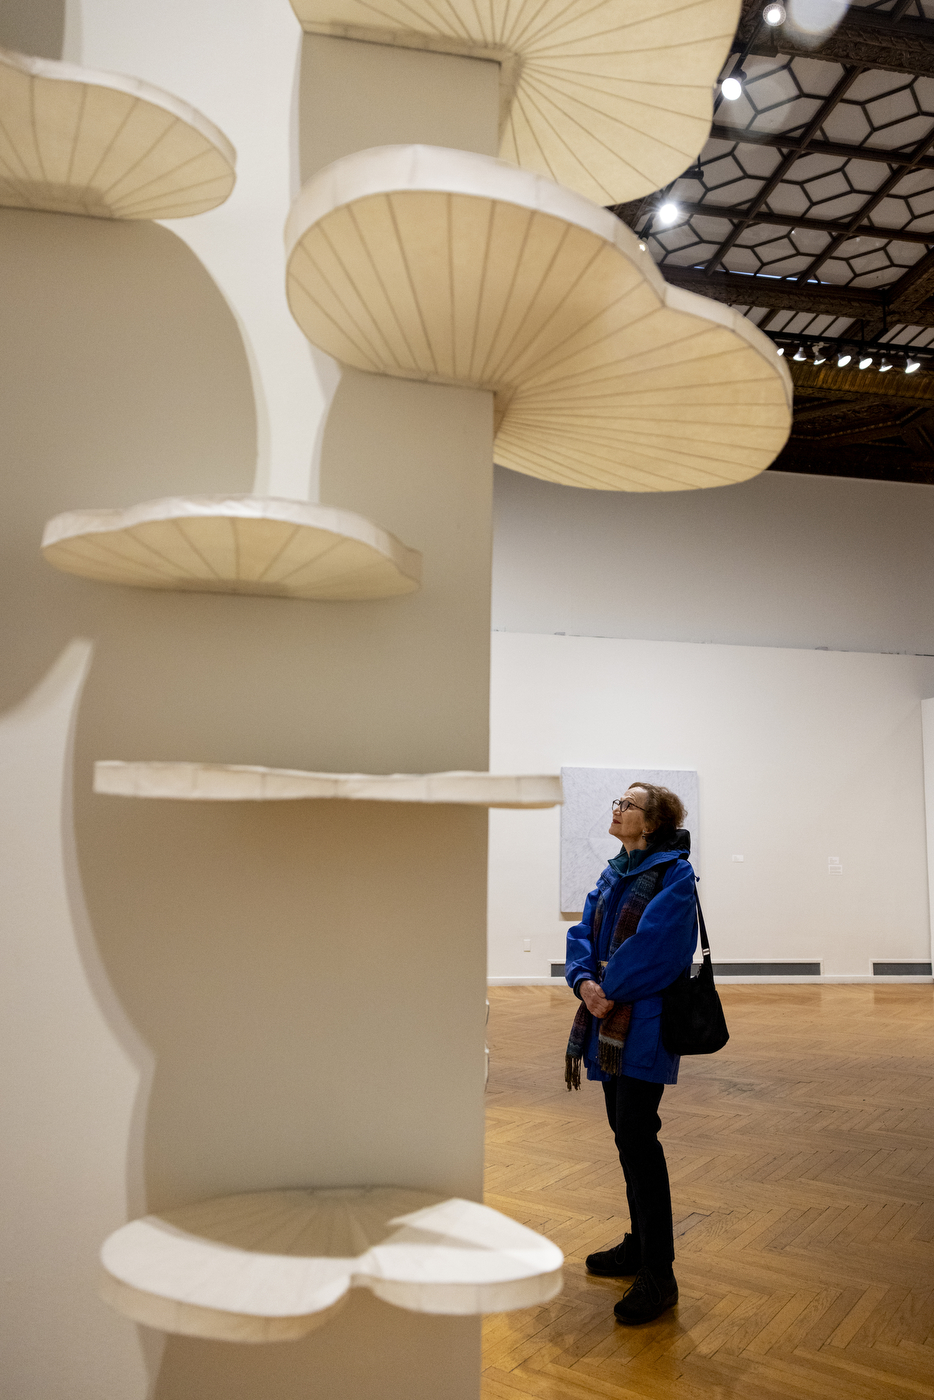 A person looking up at a sculpture in the center of an art gallery.